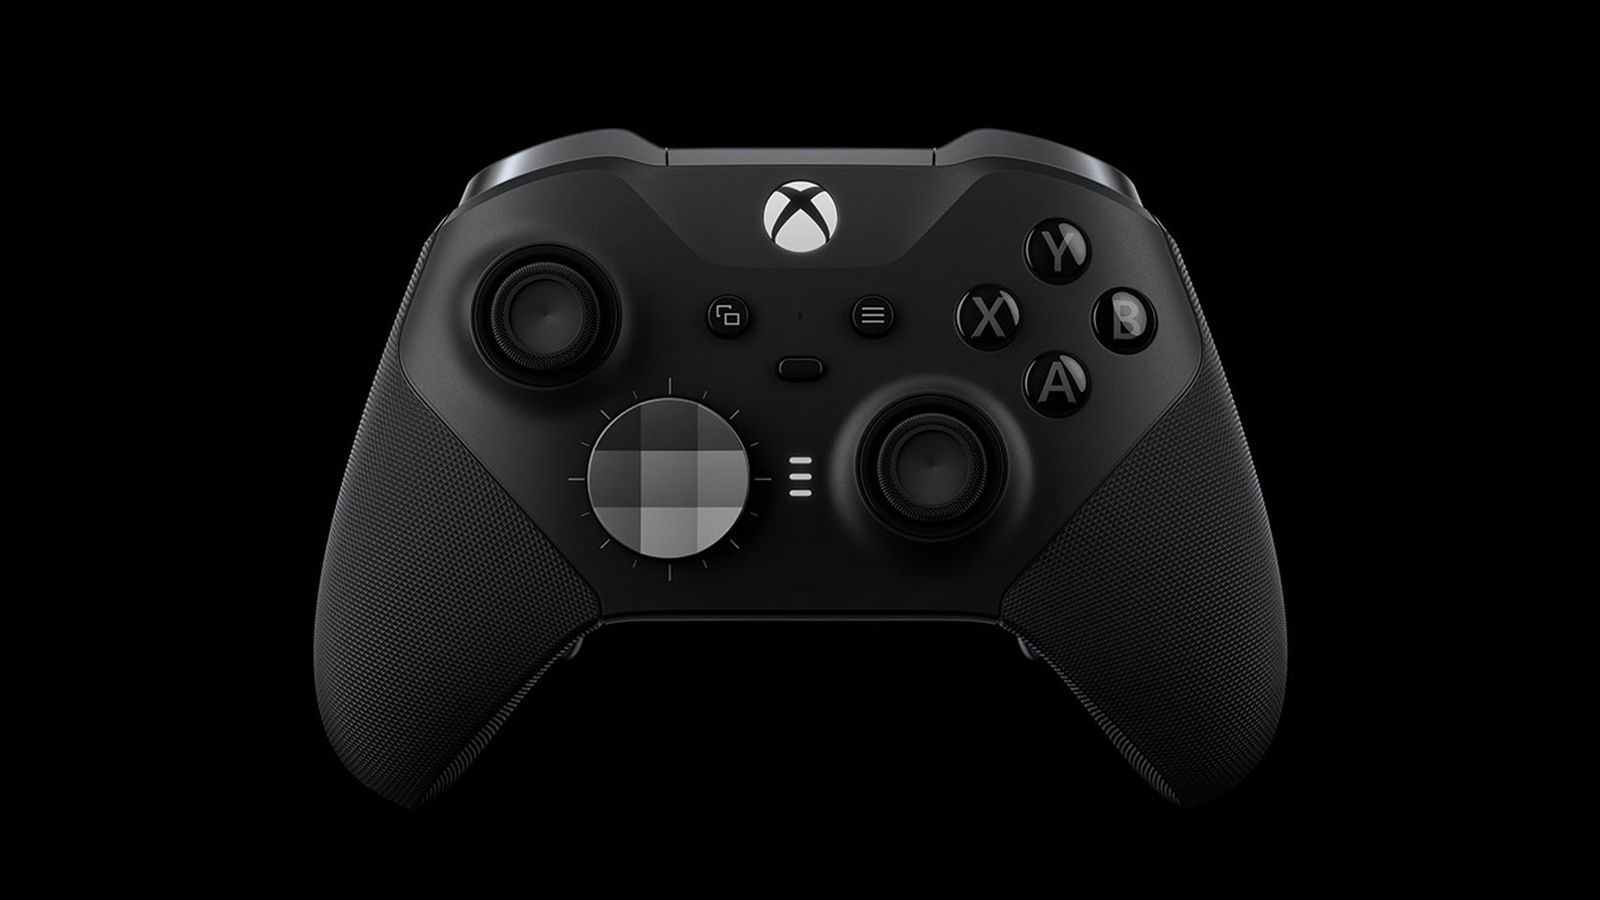 Xbox Elite Series 2 product image of a black Xbox controller featuring a white and light grey trackpad on the left side.